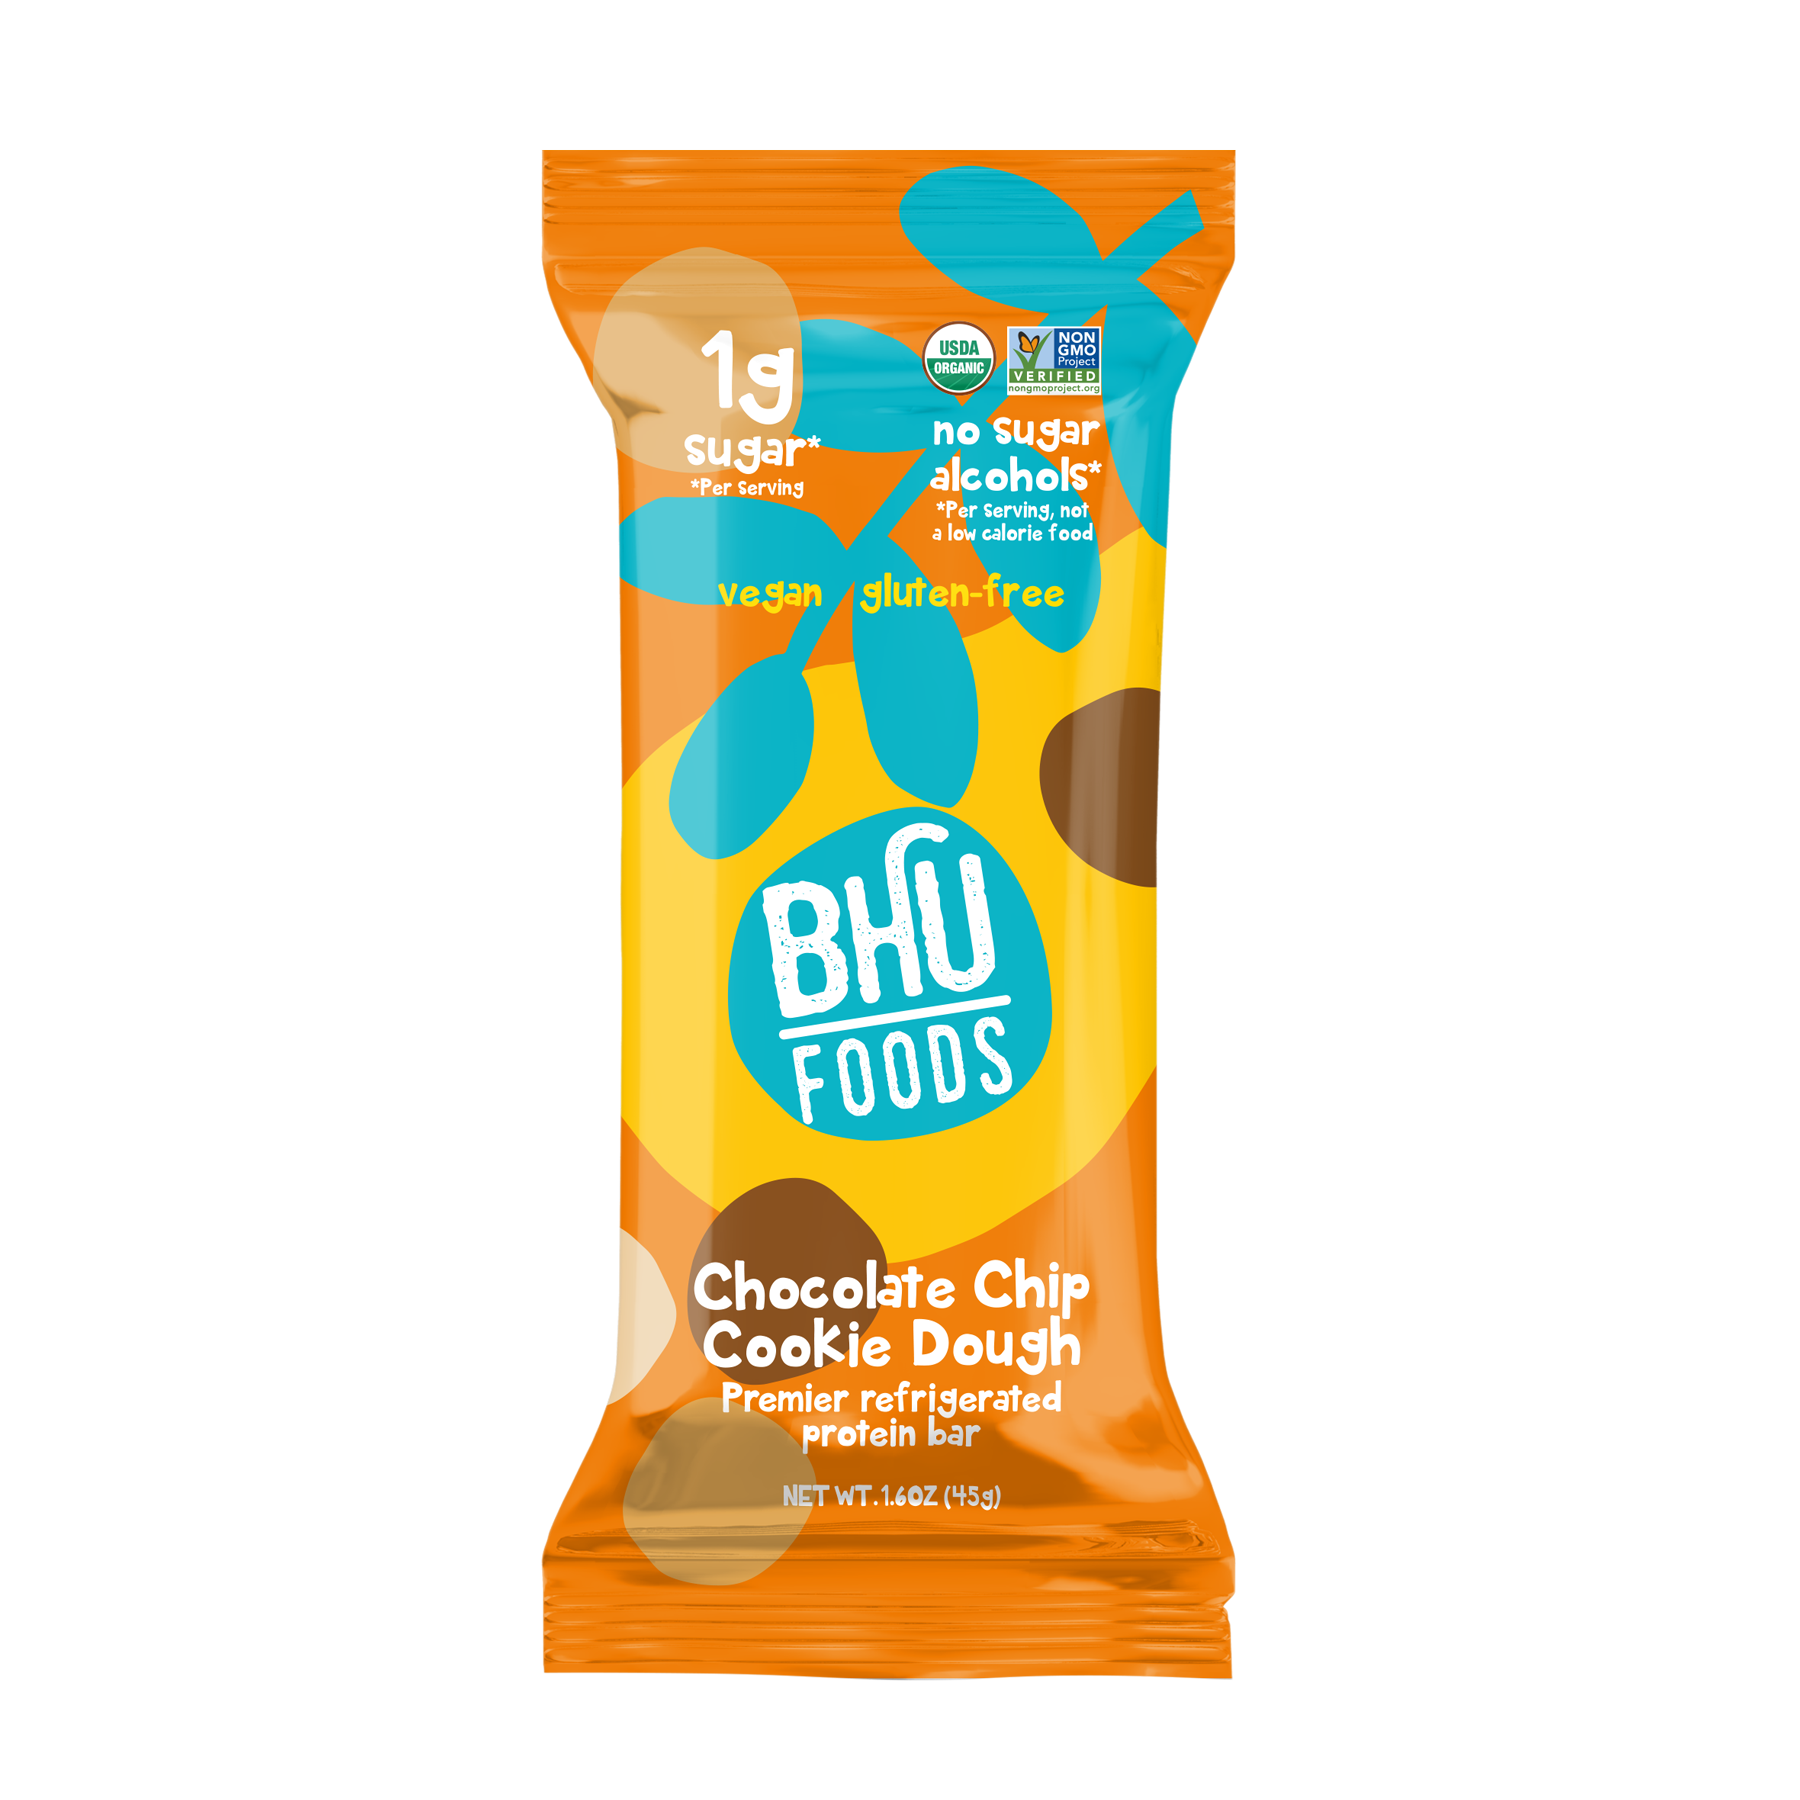 BHU Foods Premier Refrigerated Protein Bar - Chocolate Chip Cookie Dough 12 innerpacks per case 12.8 oz